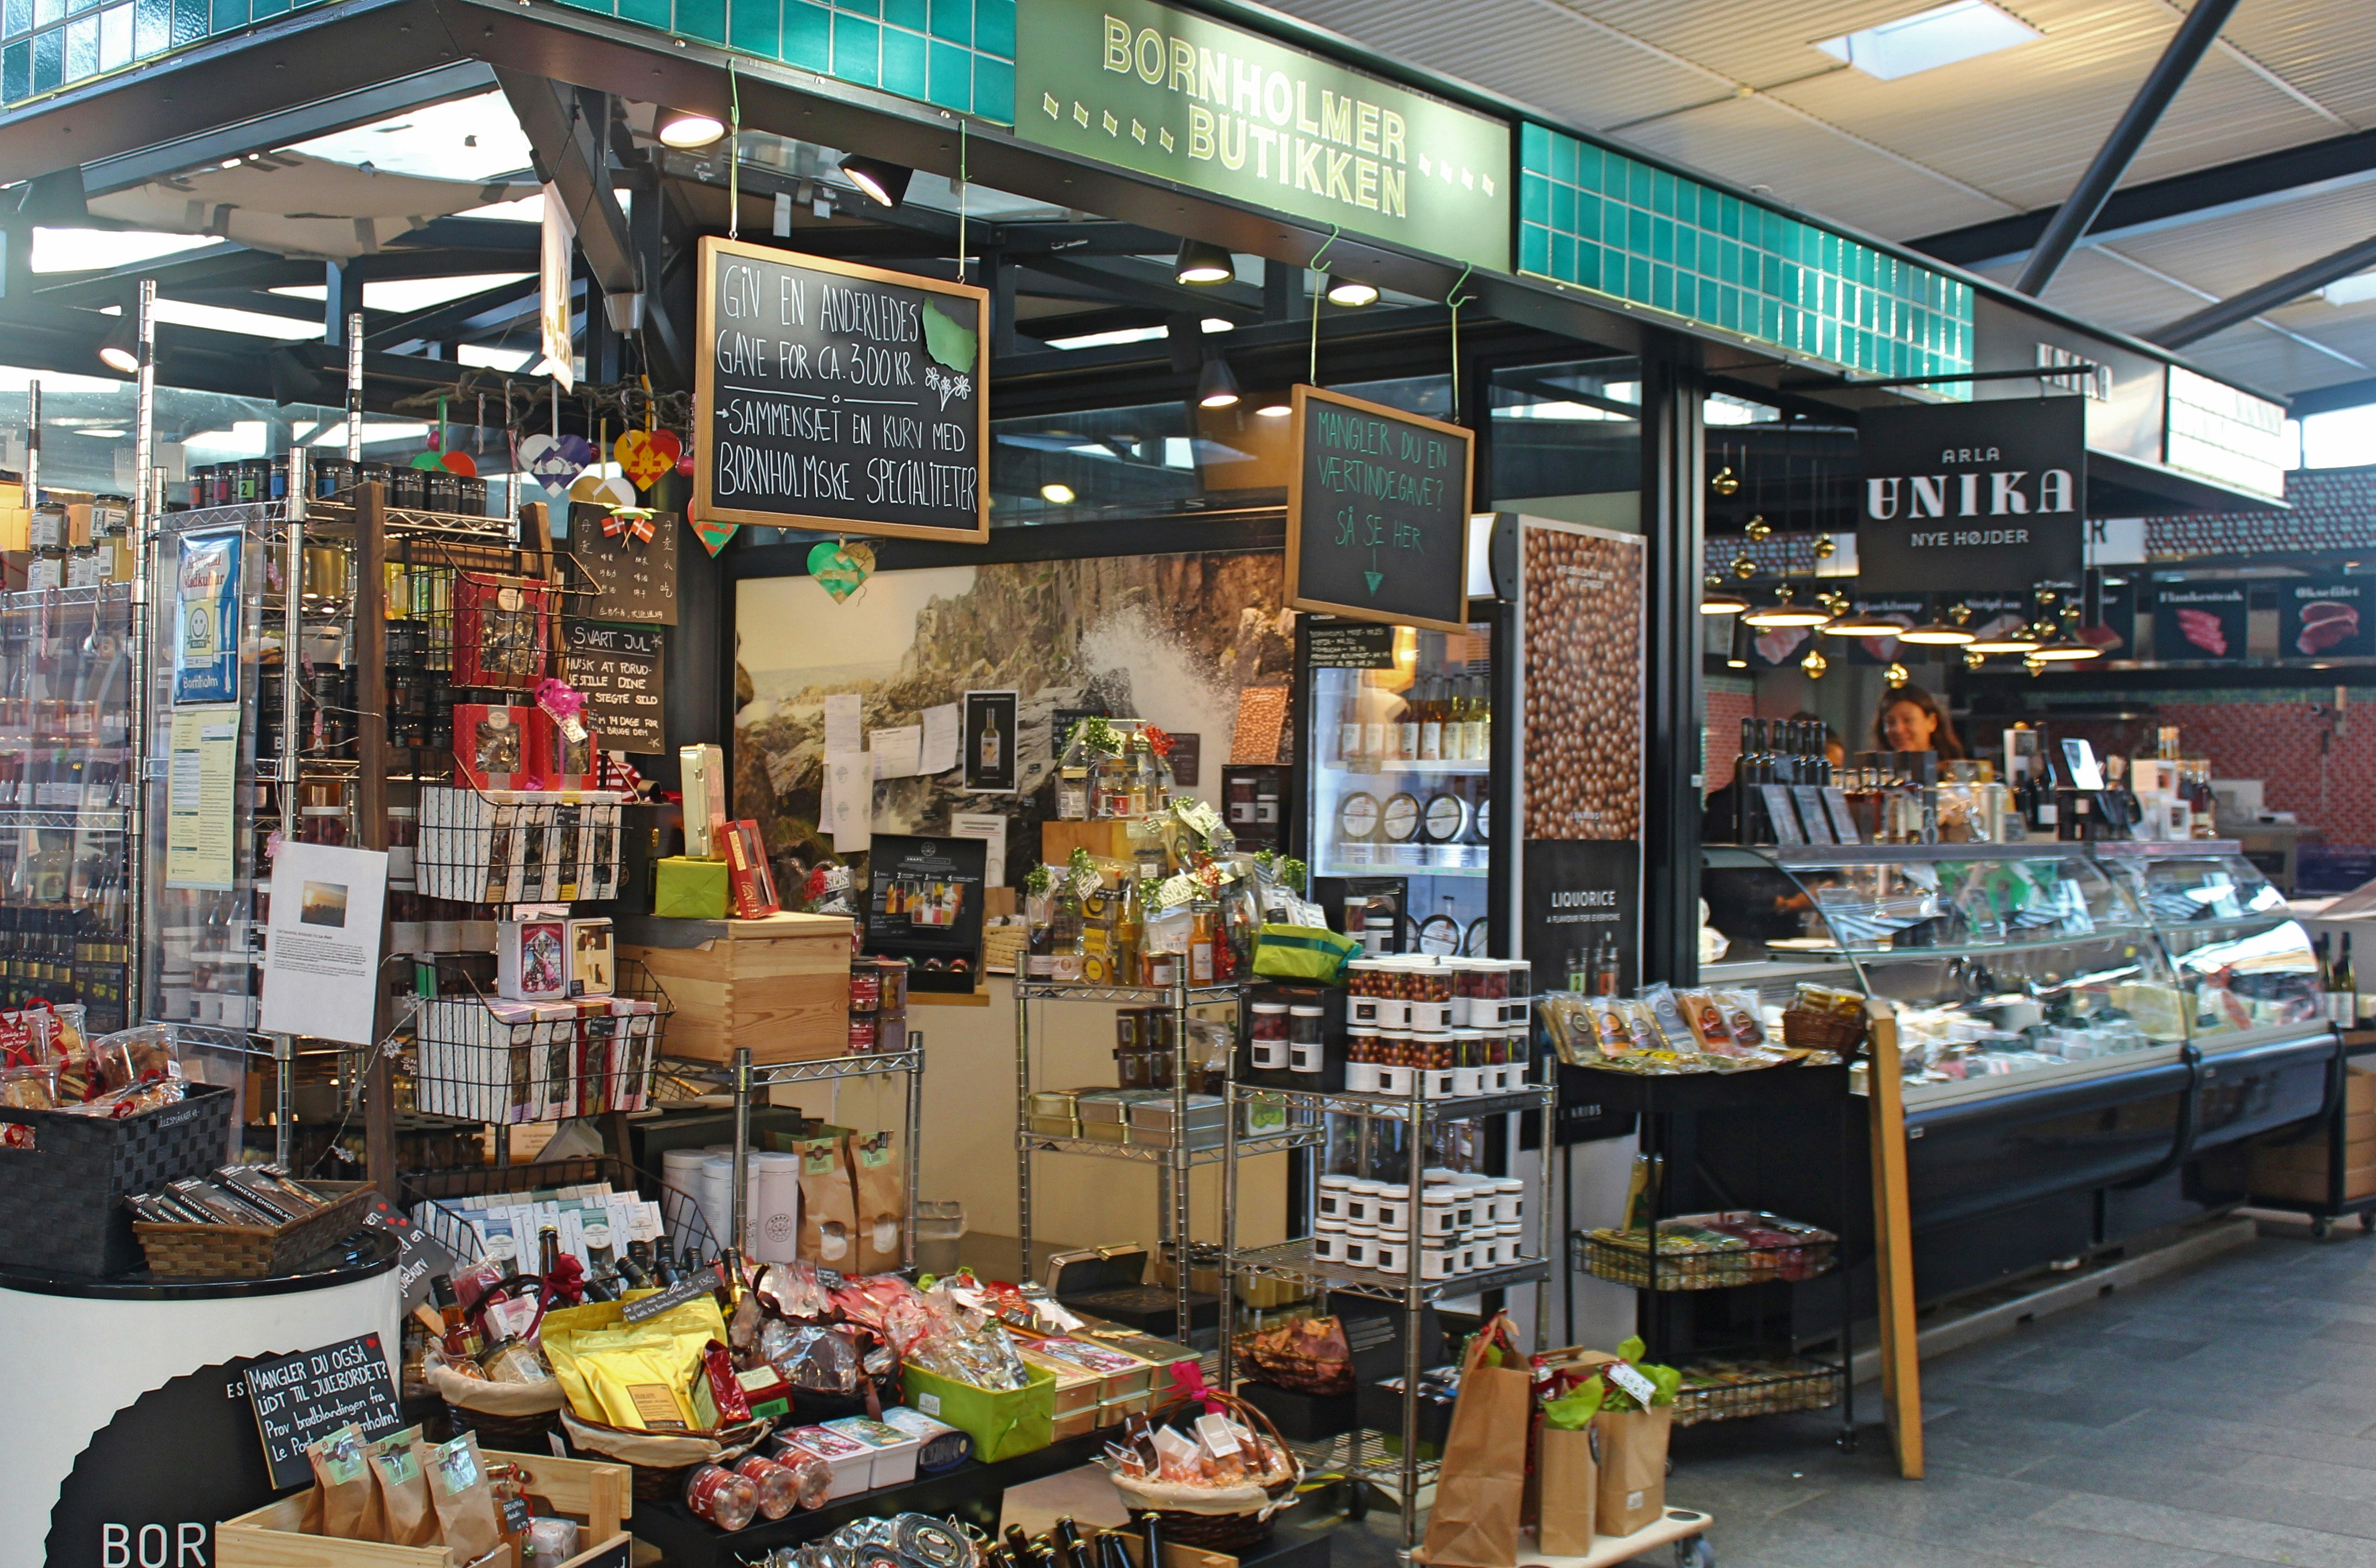 Stands at Copenhagen's Torvehallerne indoor food market; many products are displayed on racks and tables, and in glass display cabinets.